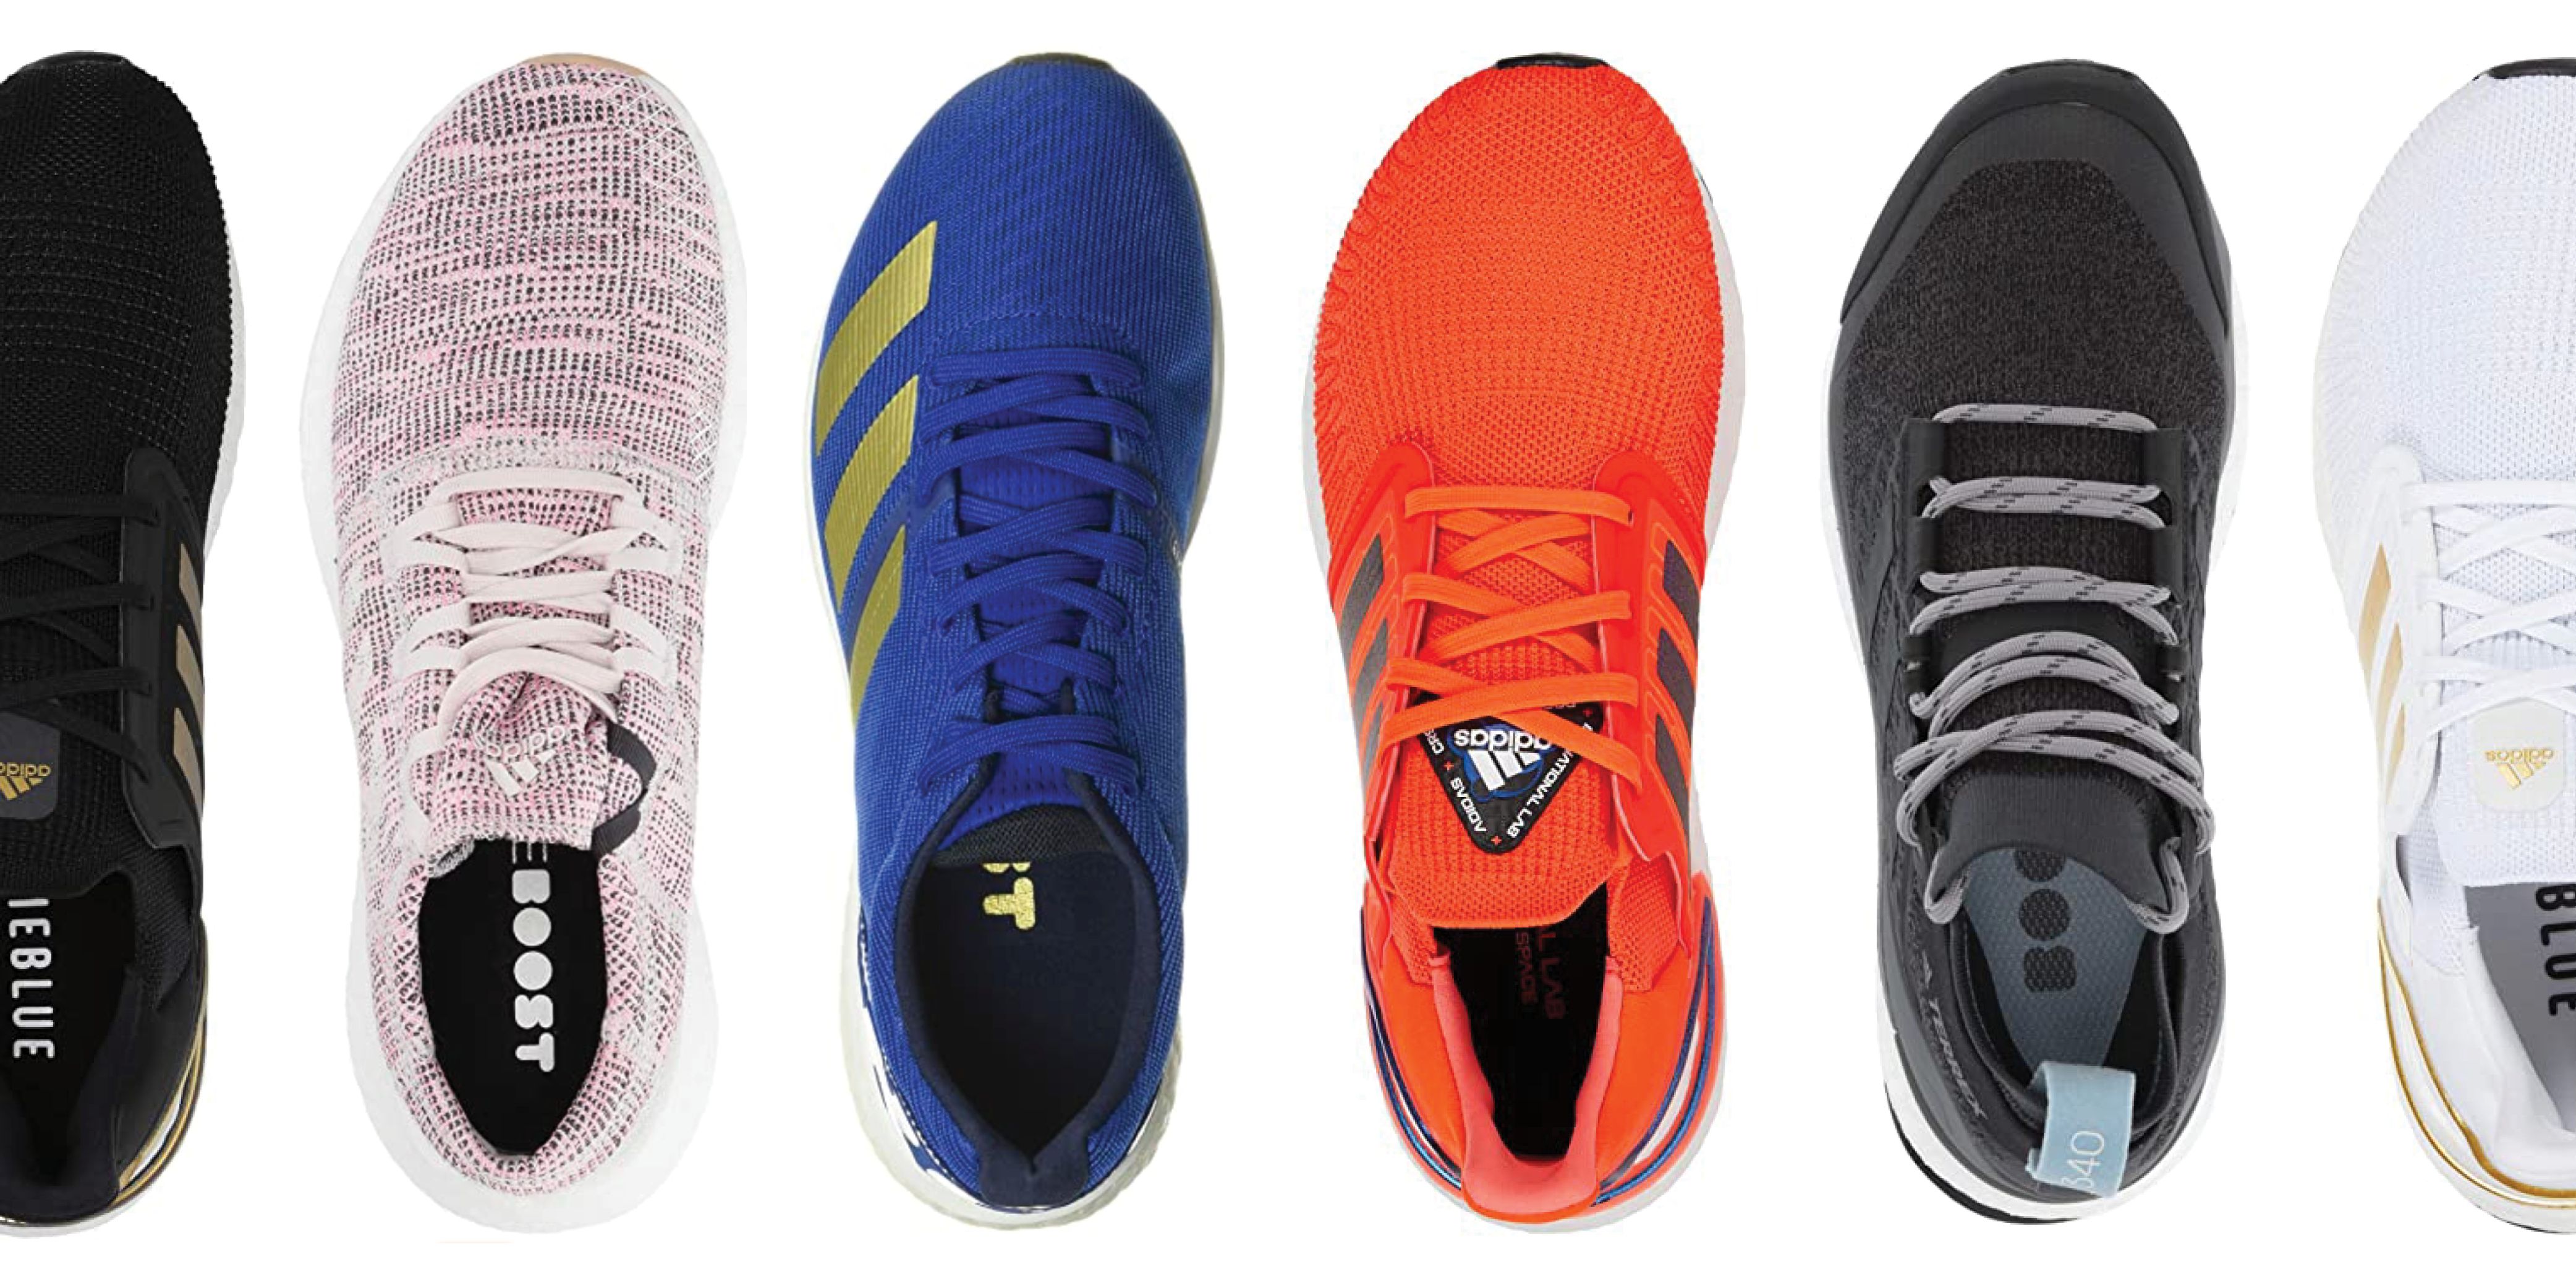 adidas shoes ranked